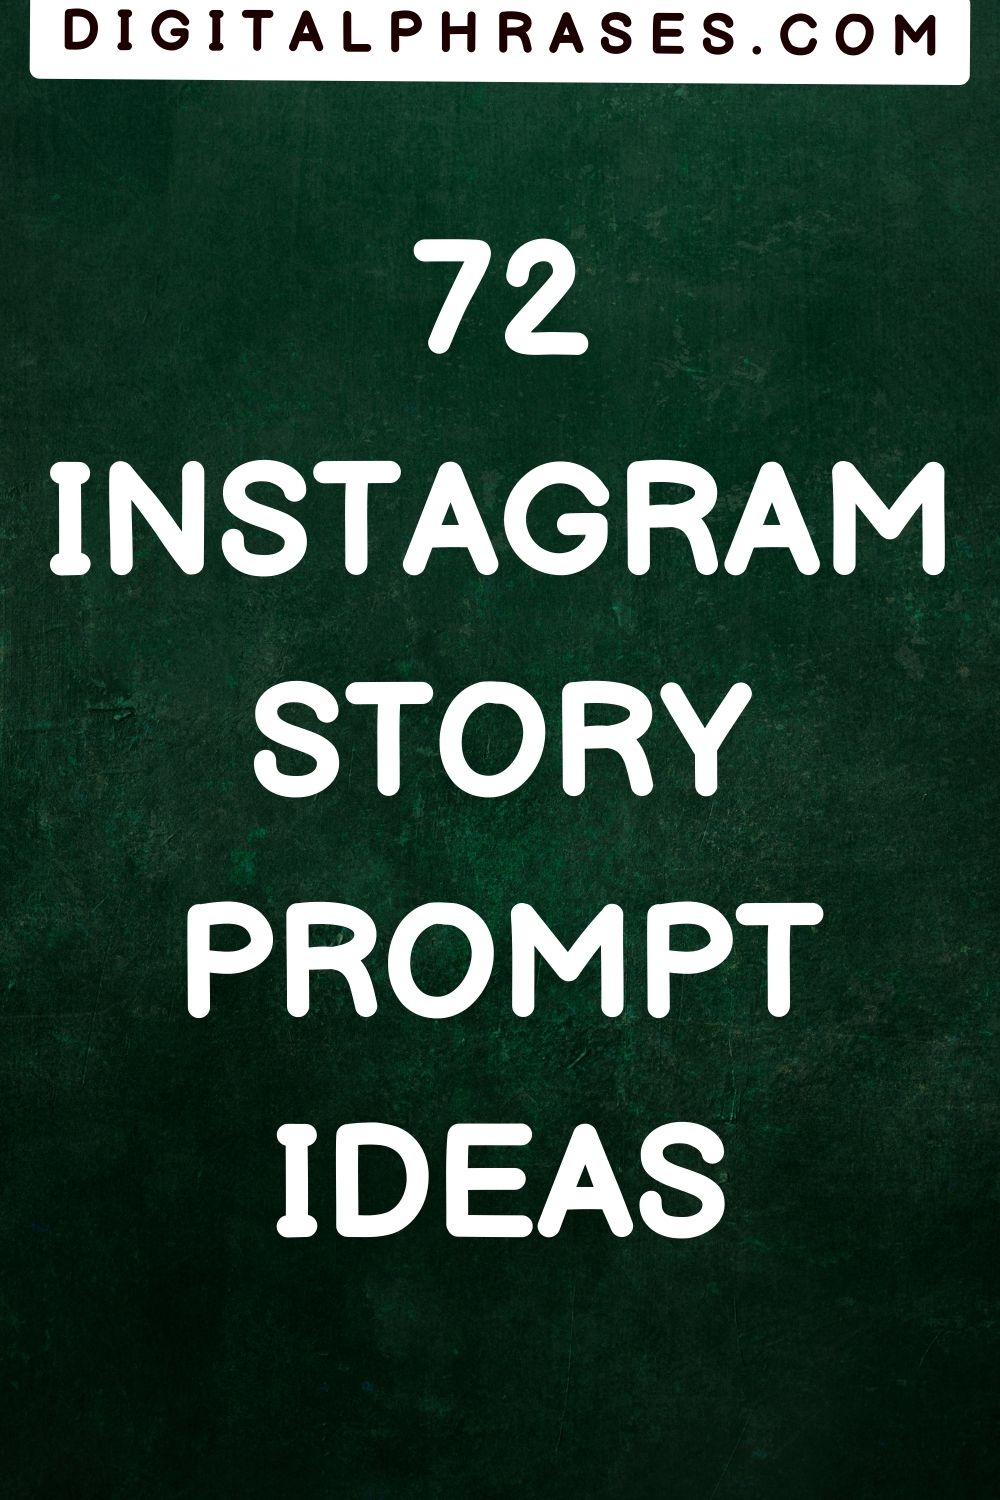 green background image with text - 72 instagram story prompt ideas